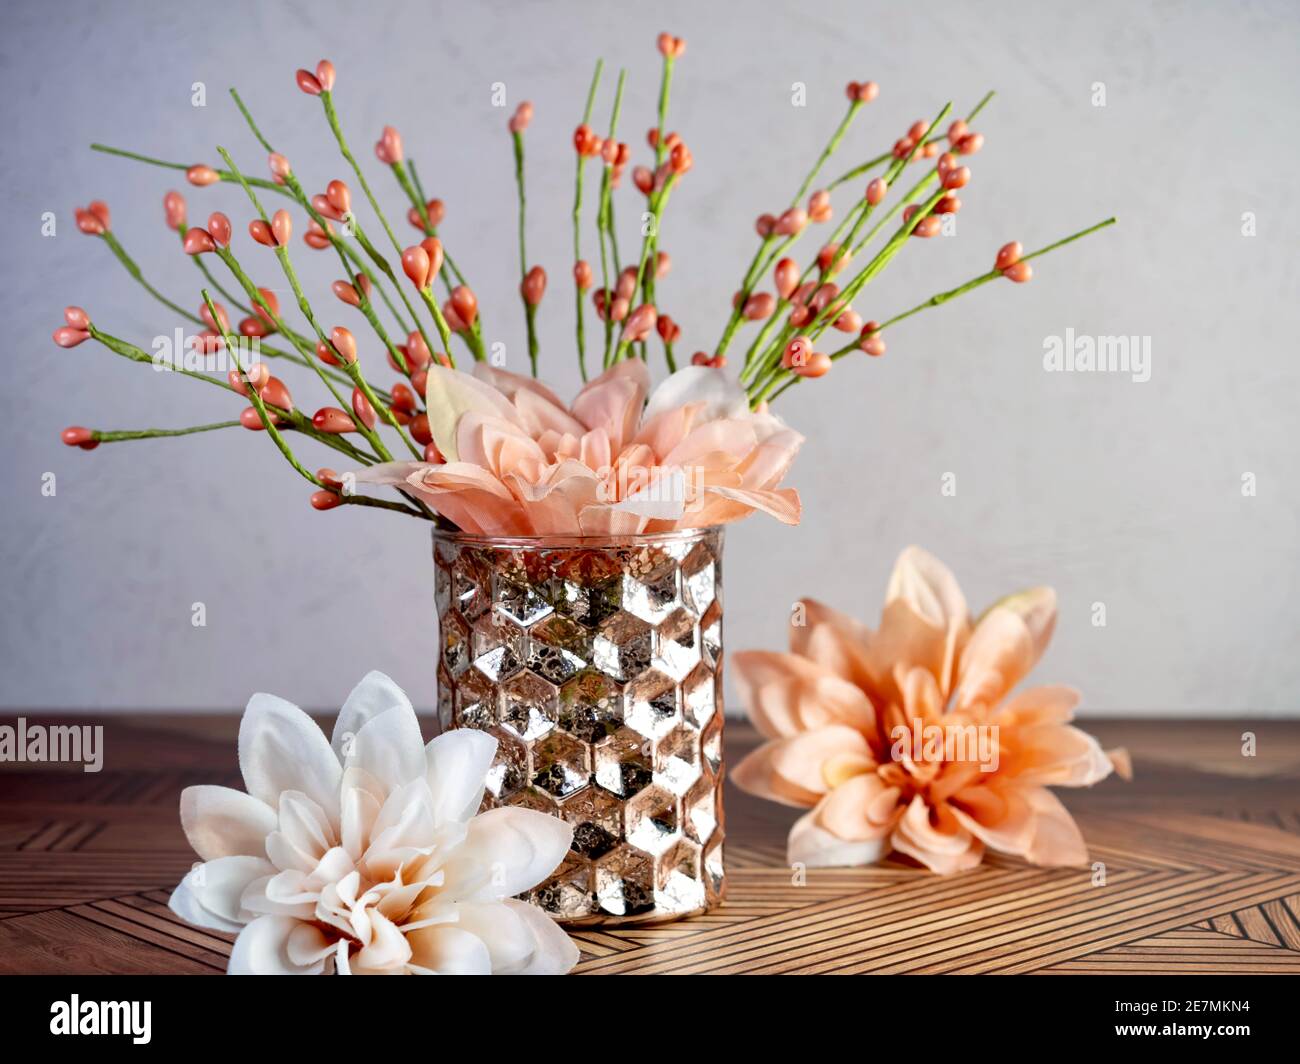 Orange and peach flowers in a brown orange hammered vase sitting on a wooden surface.  Spring decor, interior design, still life photography. Stock Photo